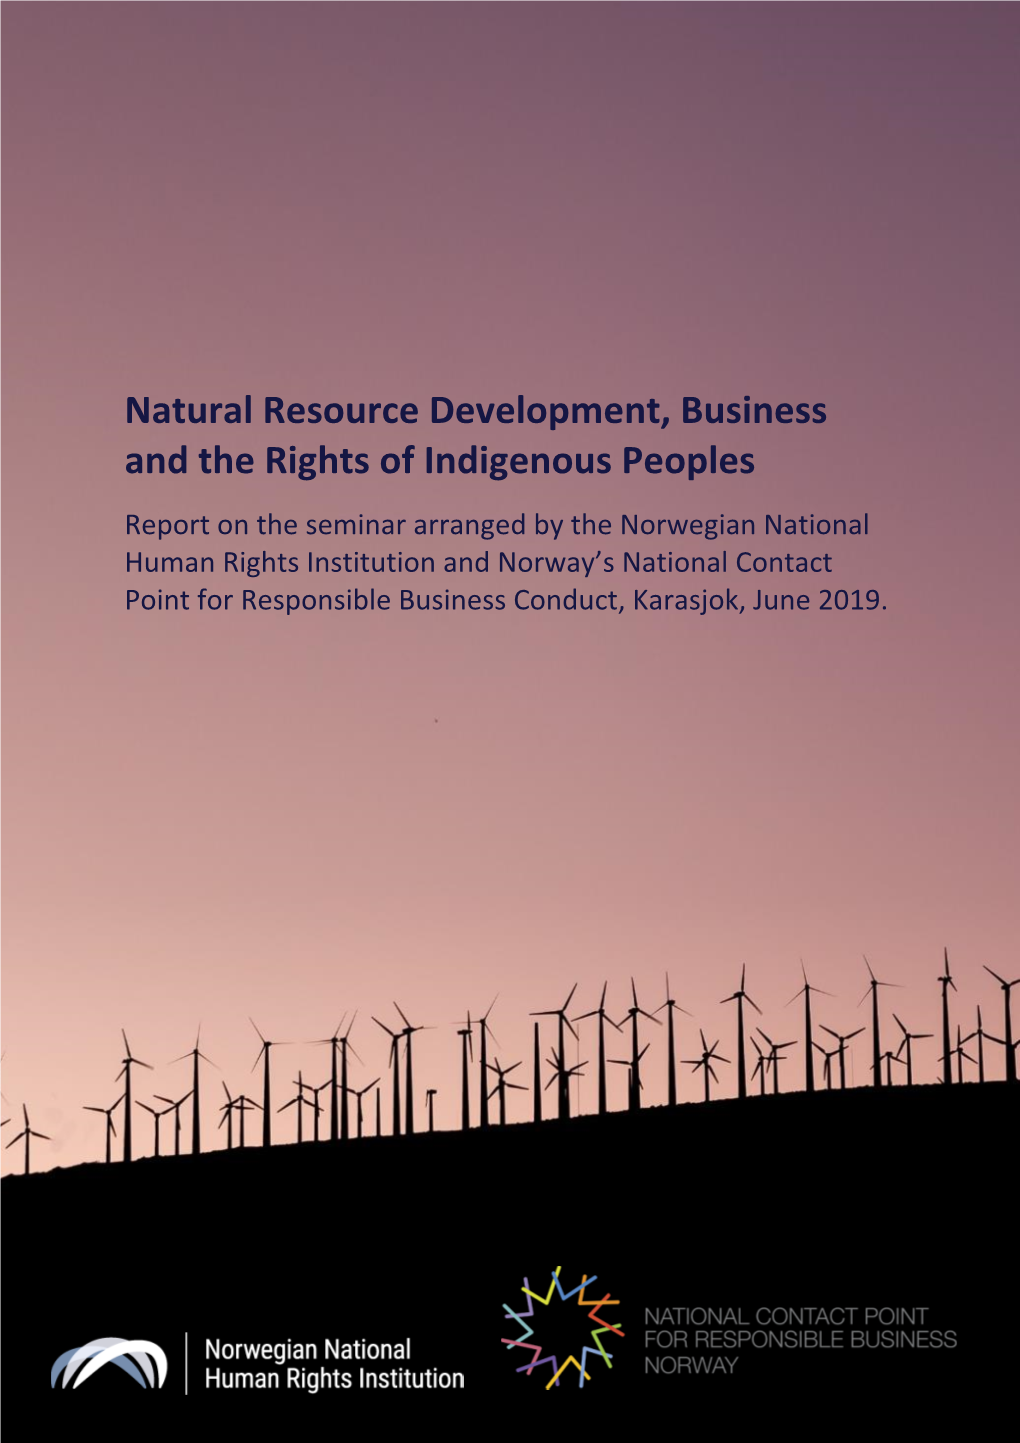 Natural Resource Development, Business and the Rights of Indigenous Peoples